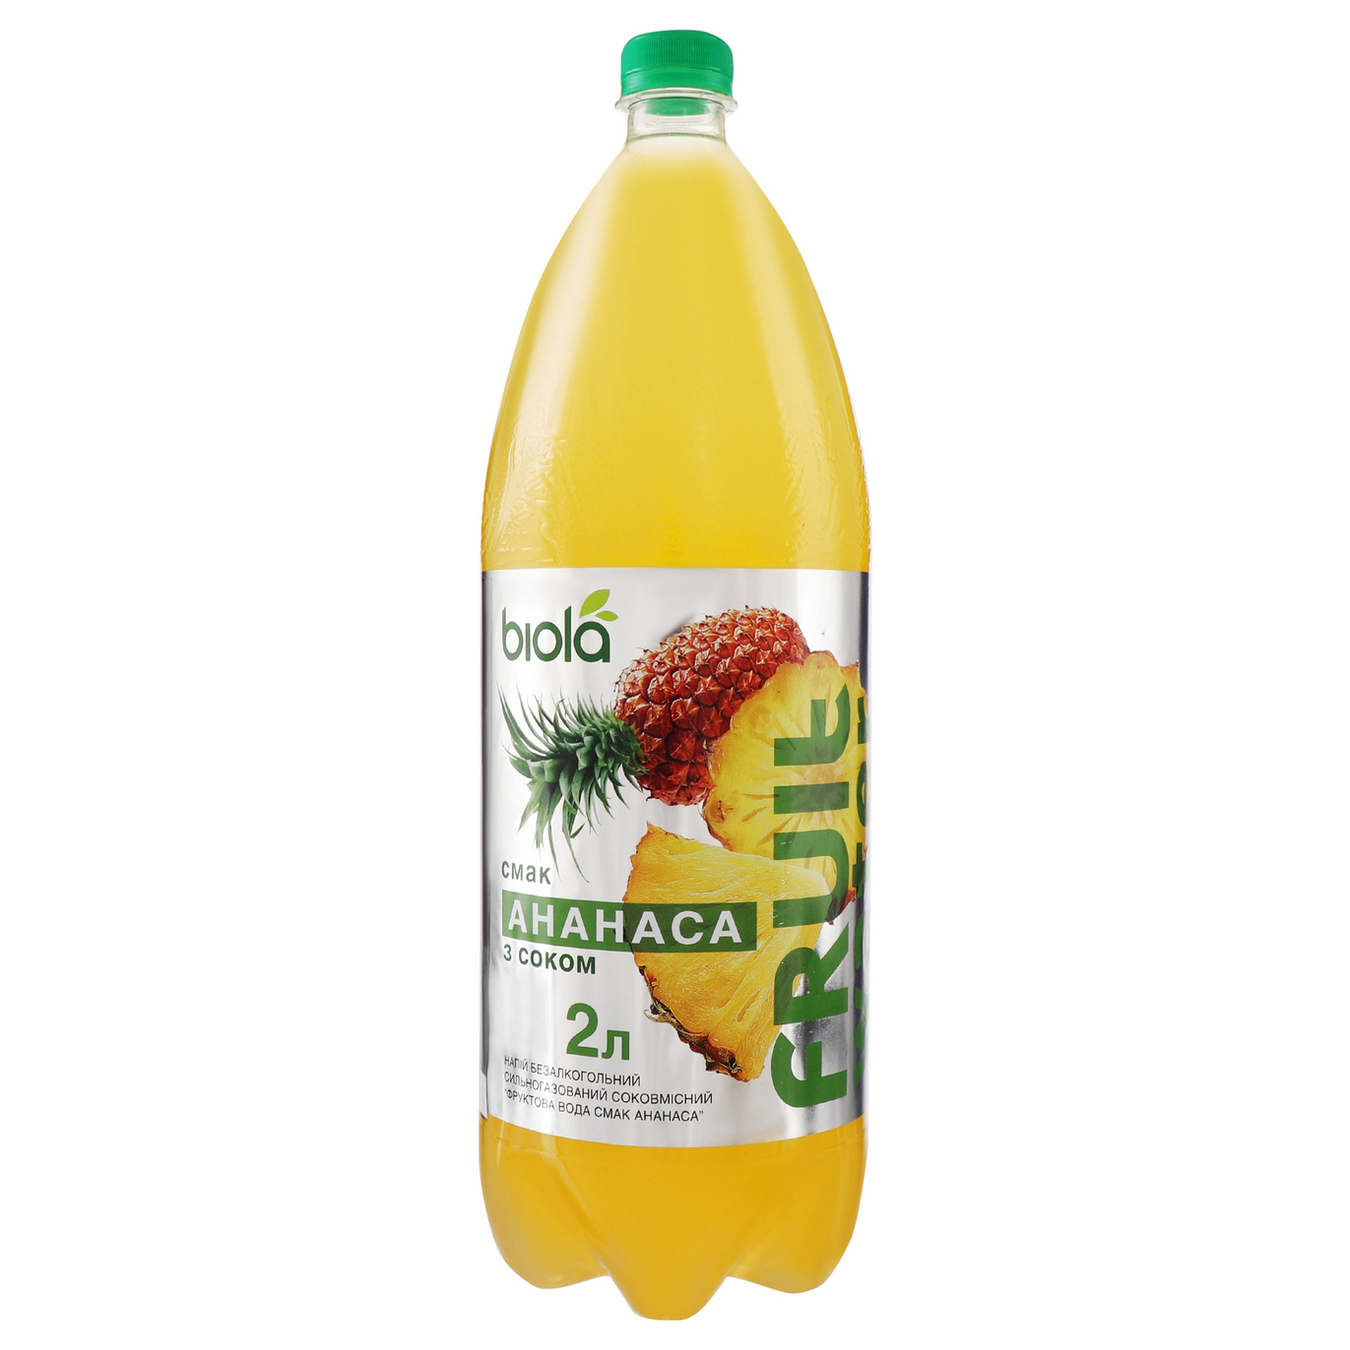 Biola Fruit Water Non-alcoholic drink Pineapple strongly carbonated 2l